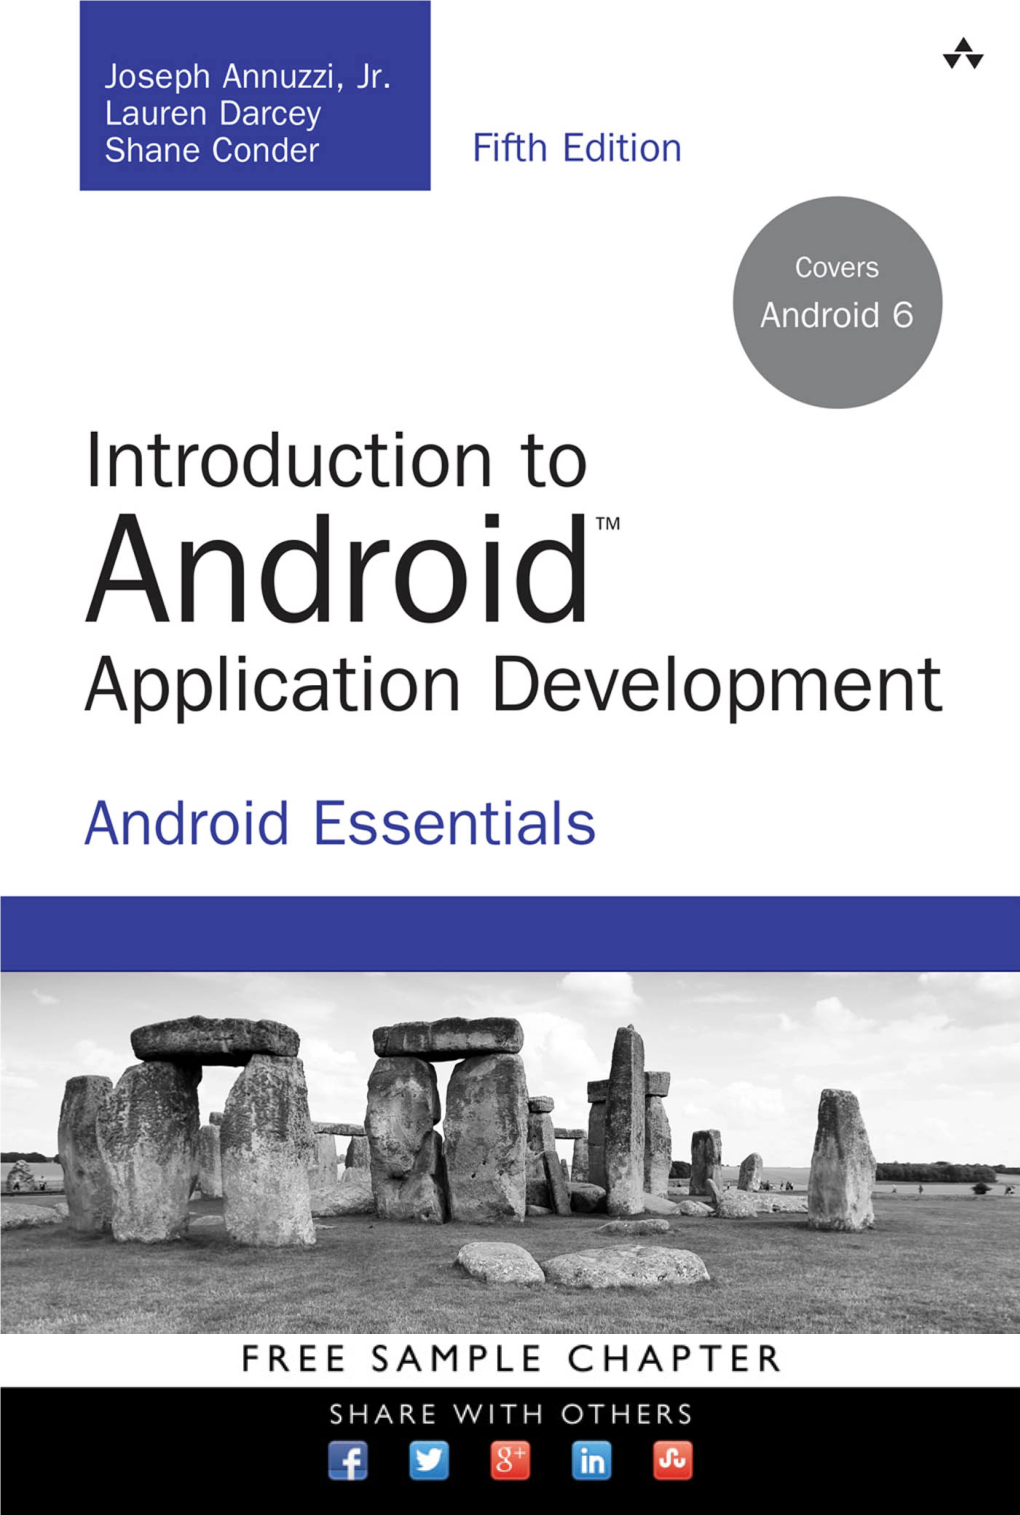 Introduction to Android™ Application Development, Fifth Edition